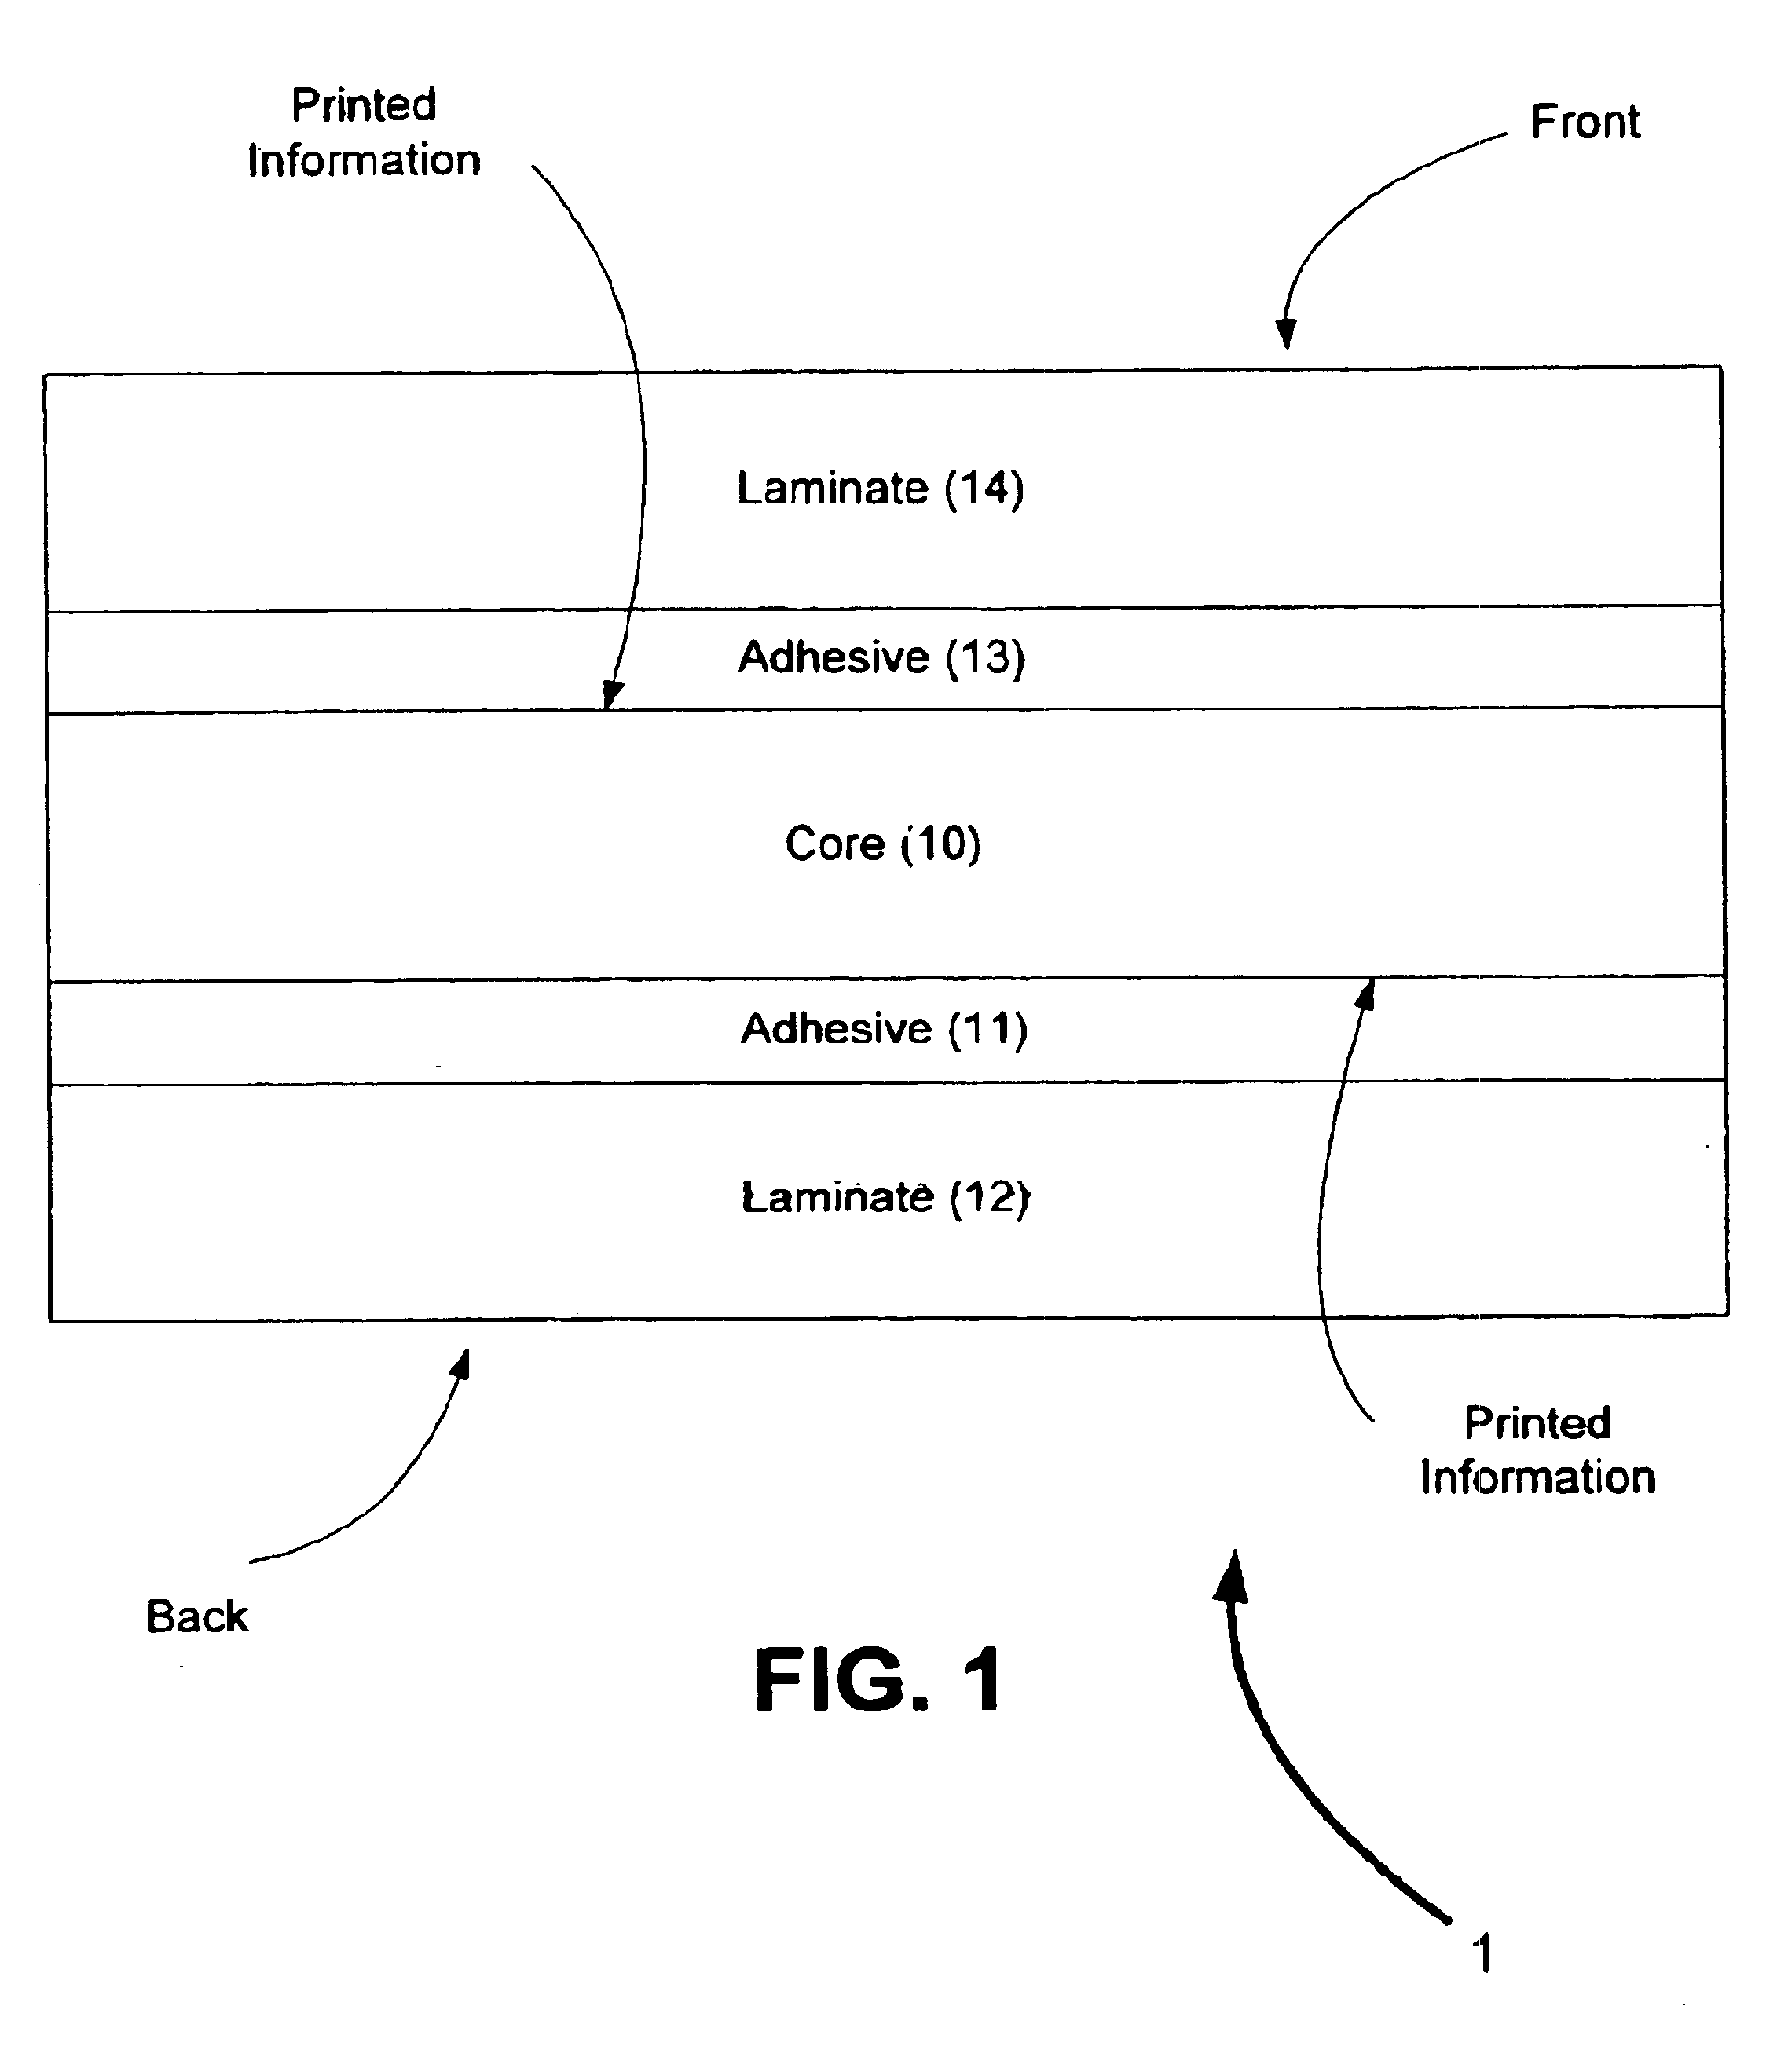 Contact smart cards having a document core, contactless smart cards including multi-layered structure, pet-based identification document, and methods of making same